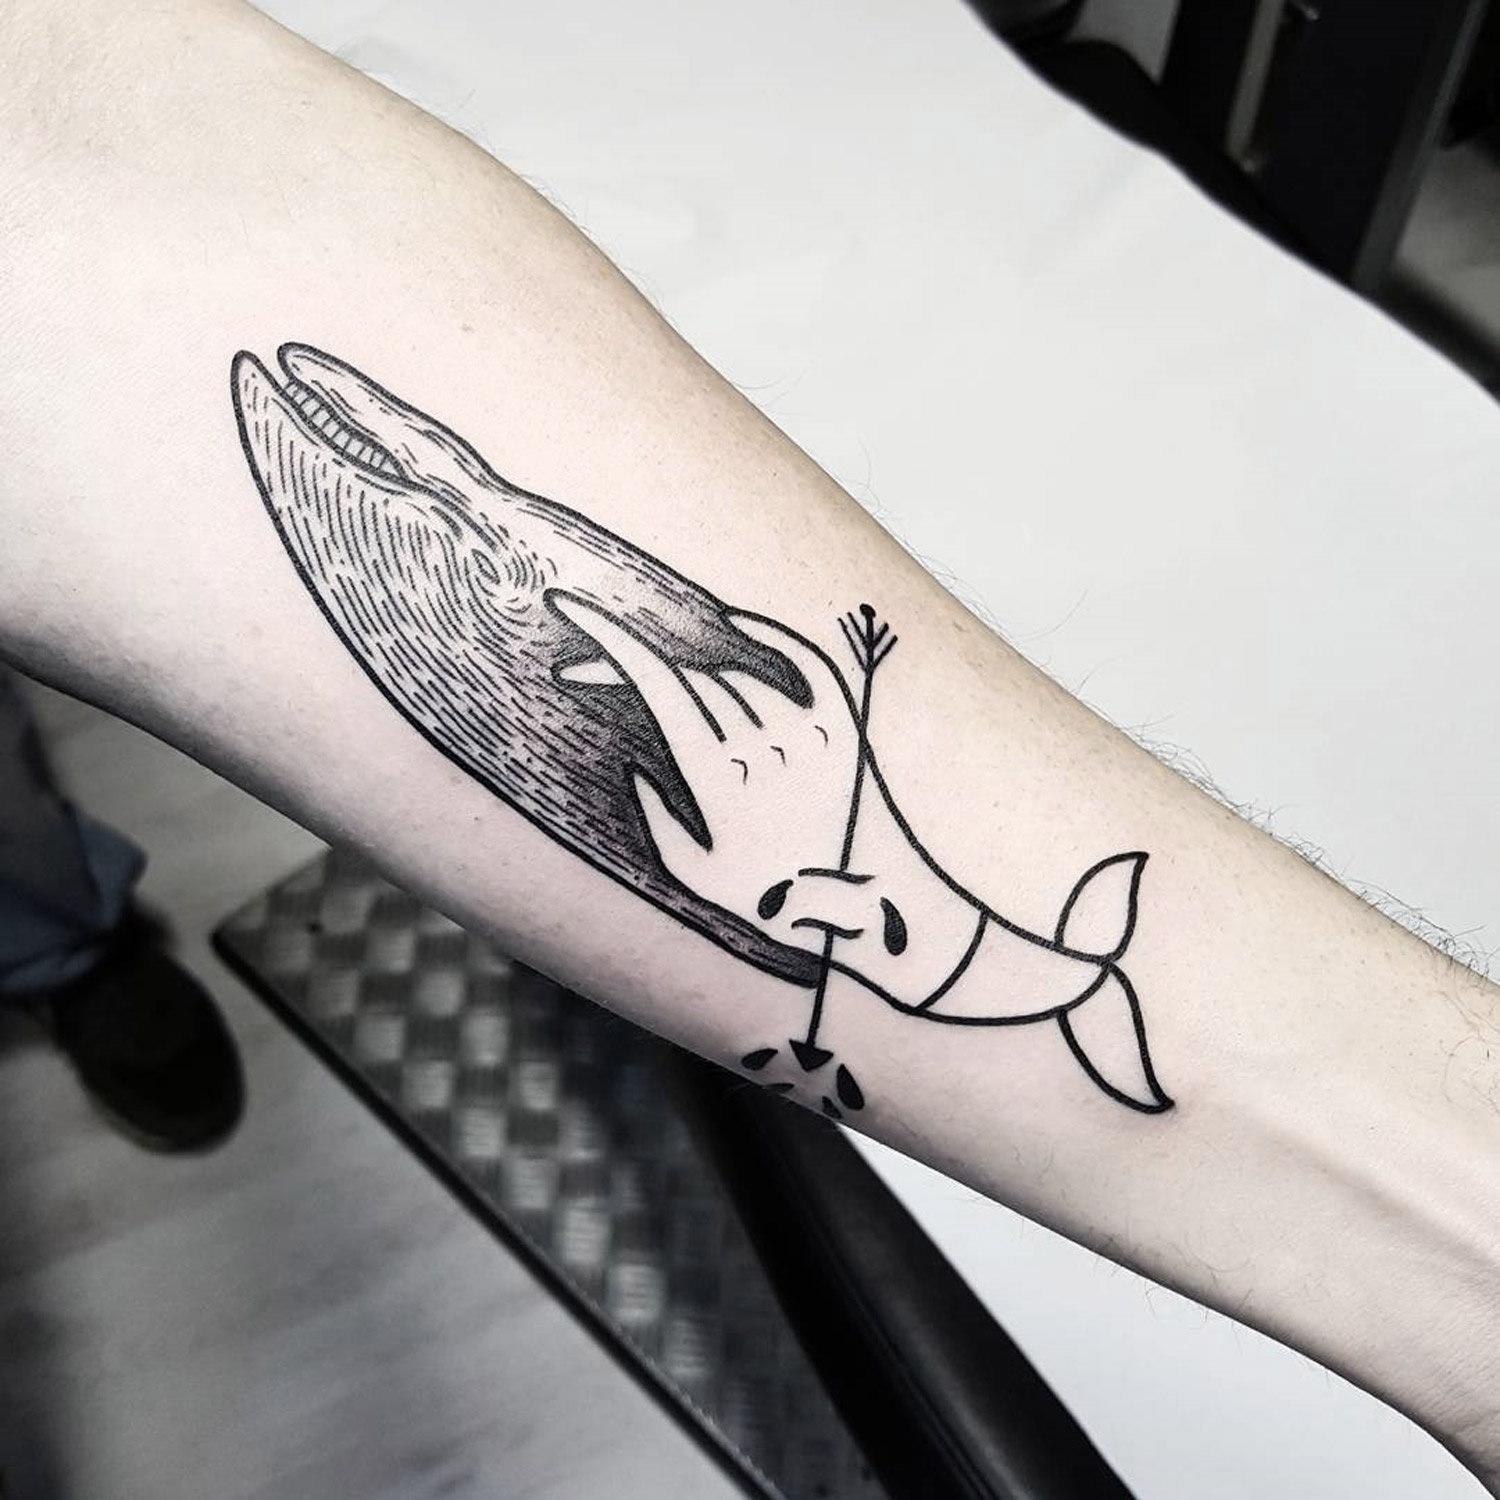 hand acting as tail of whale on an arm by matteo nangeroni